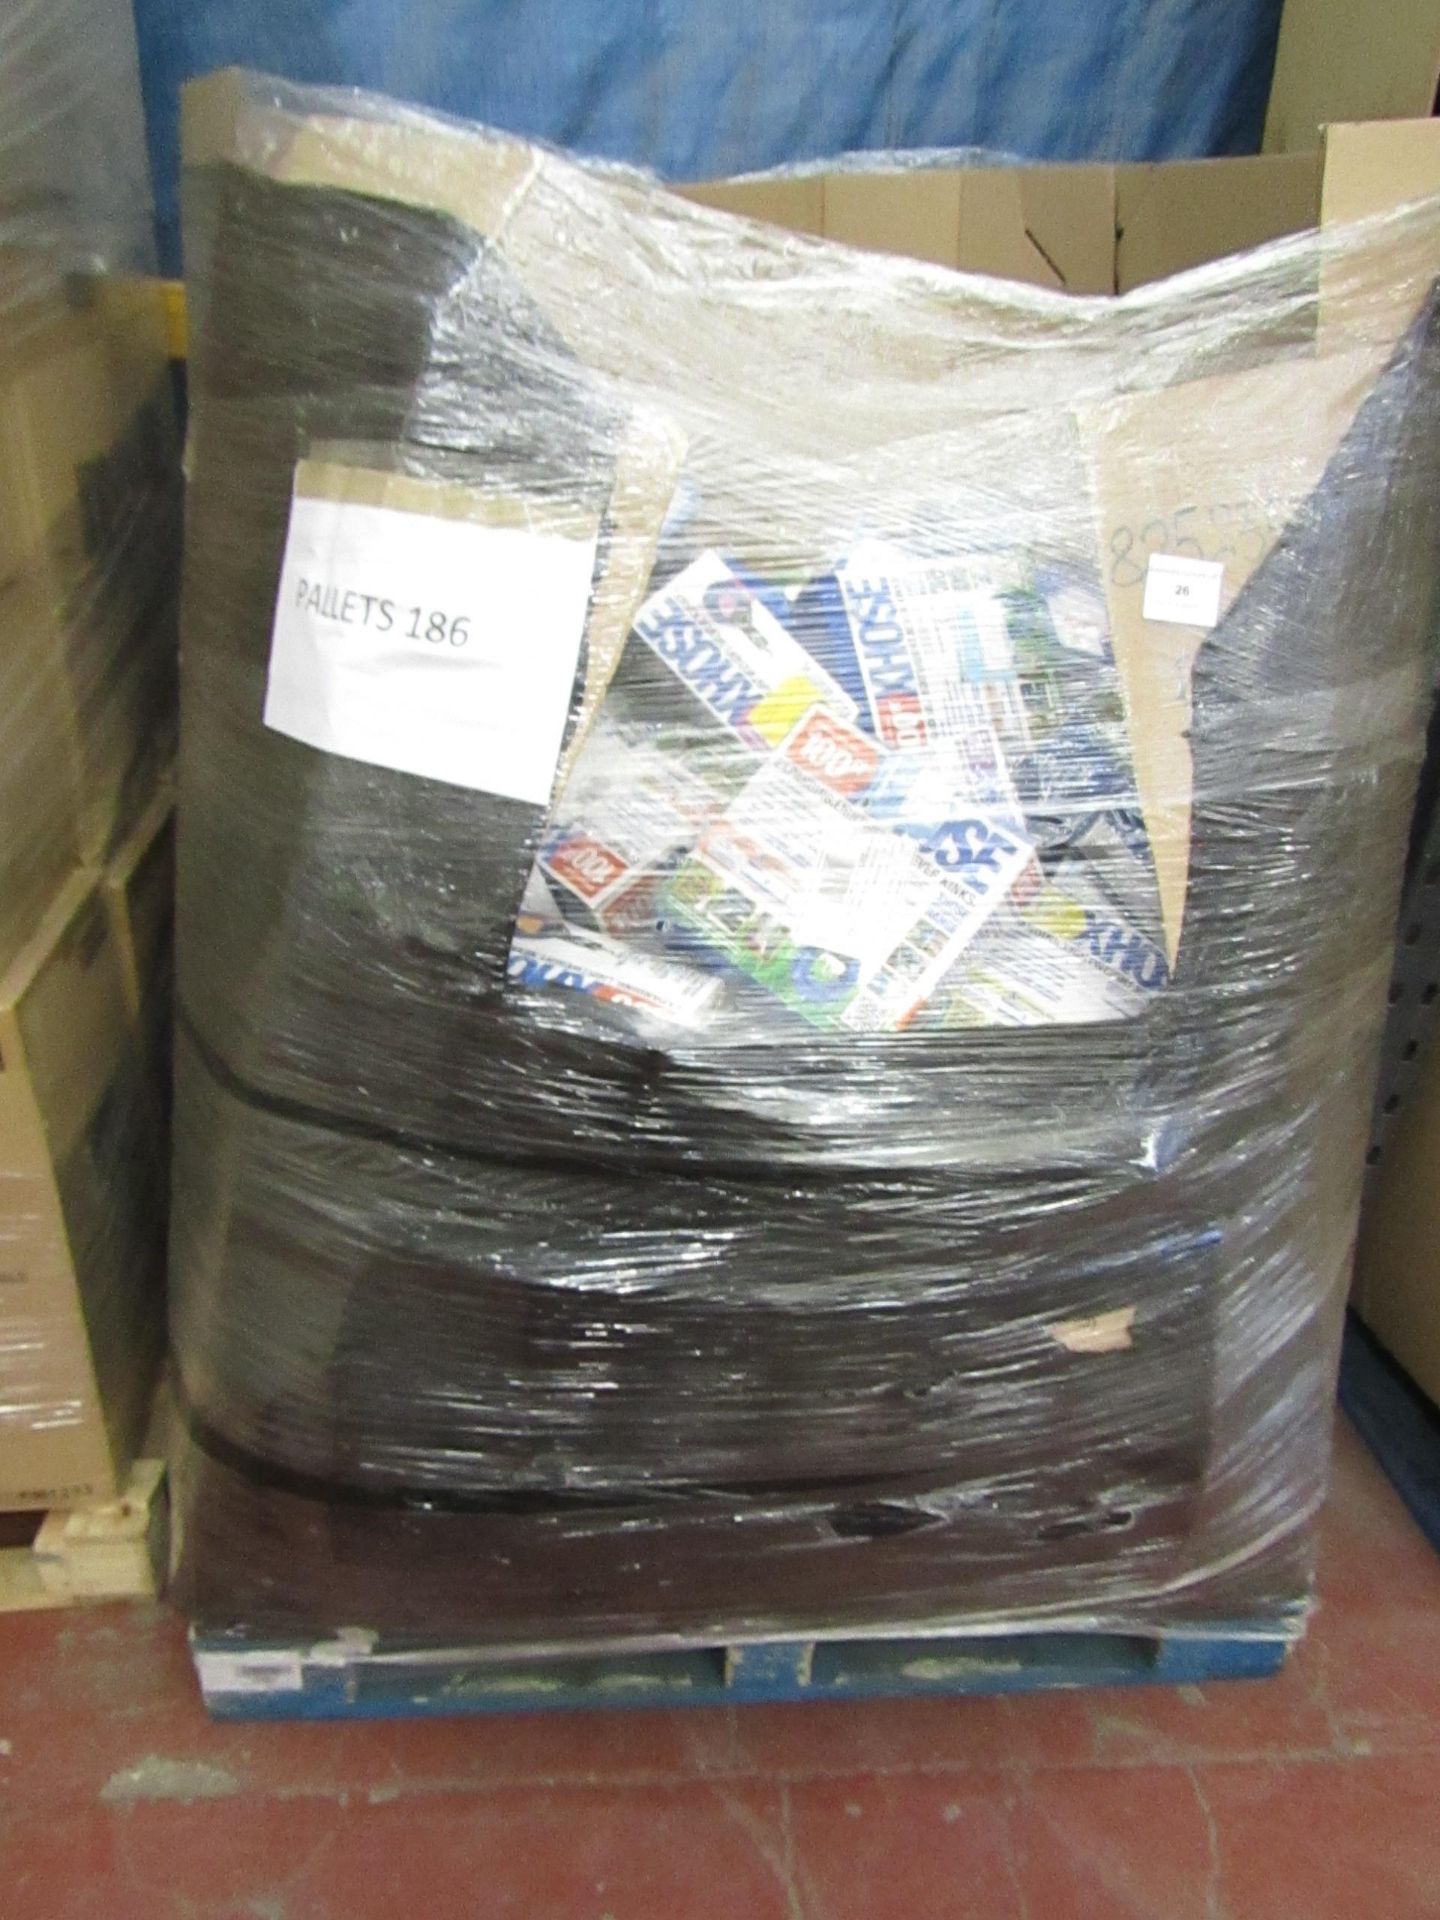 | APPROX 129X | THE PALLET CONTAINS VARIOUS SIZED XHOSES | BOXED AND UNCHECKED | NO ONLINE RE-SALE |